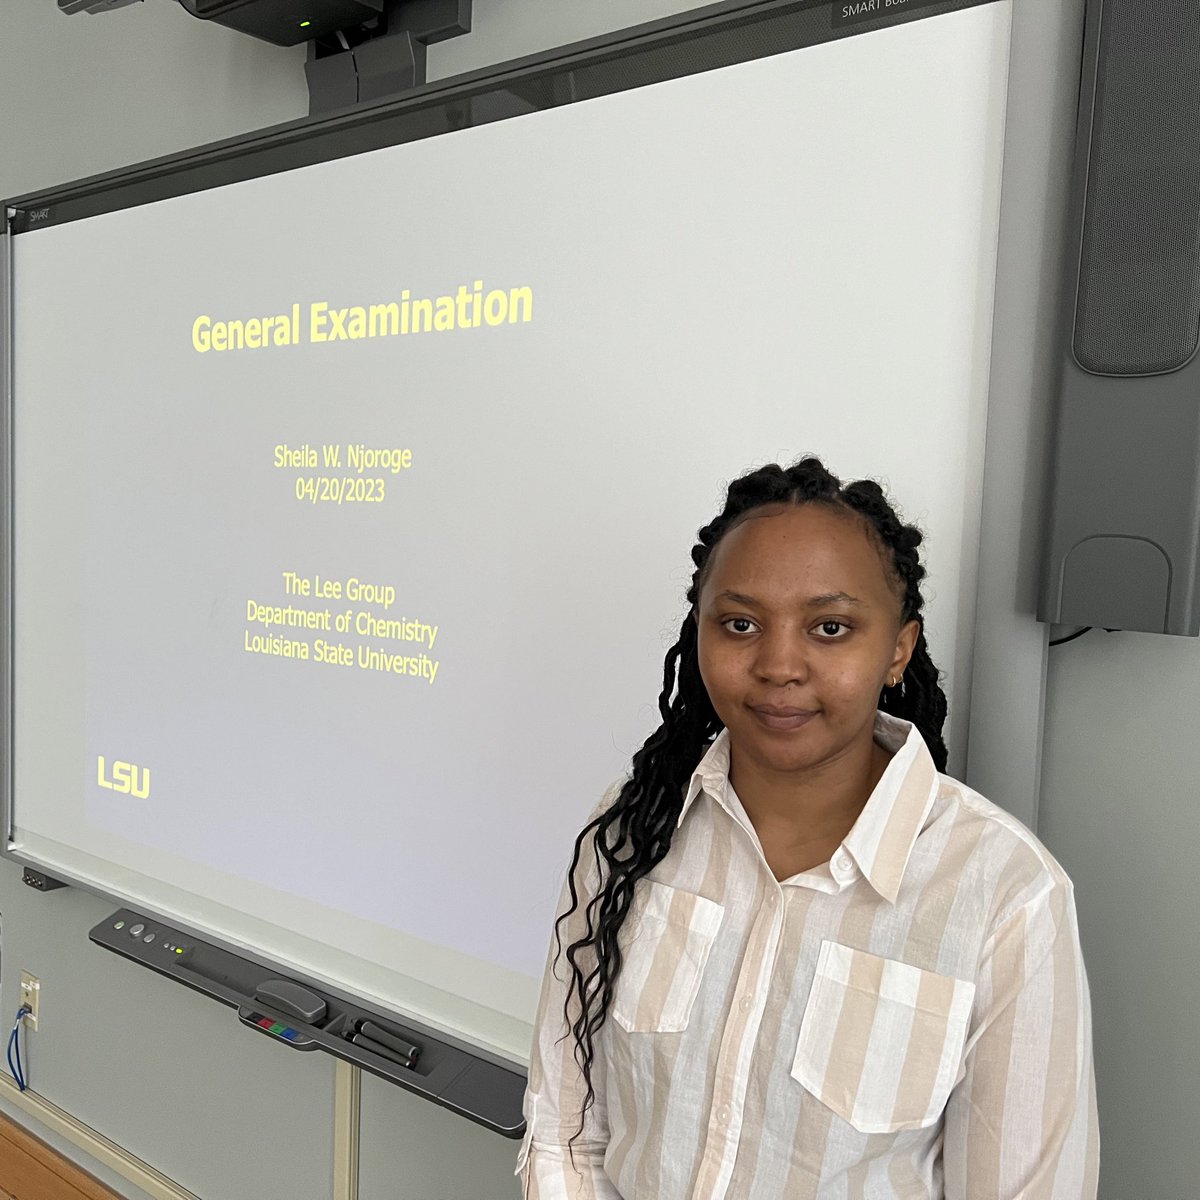 Congrats to Sheila @sheilanjoroge for passing her PhD candidacy exam!